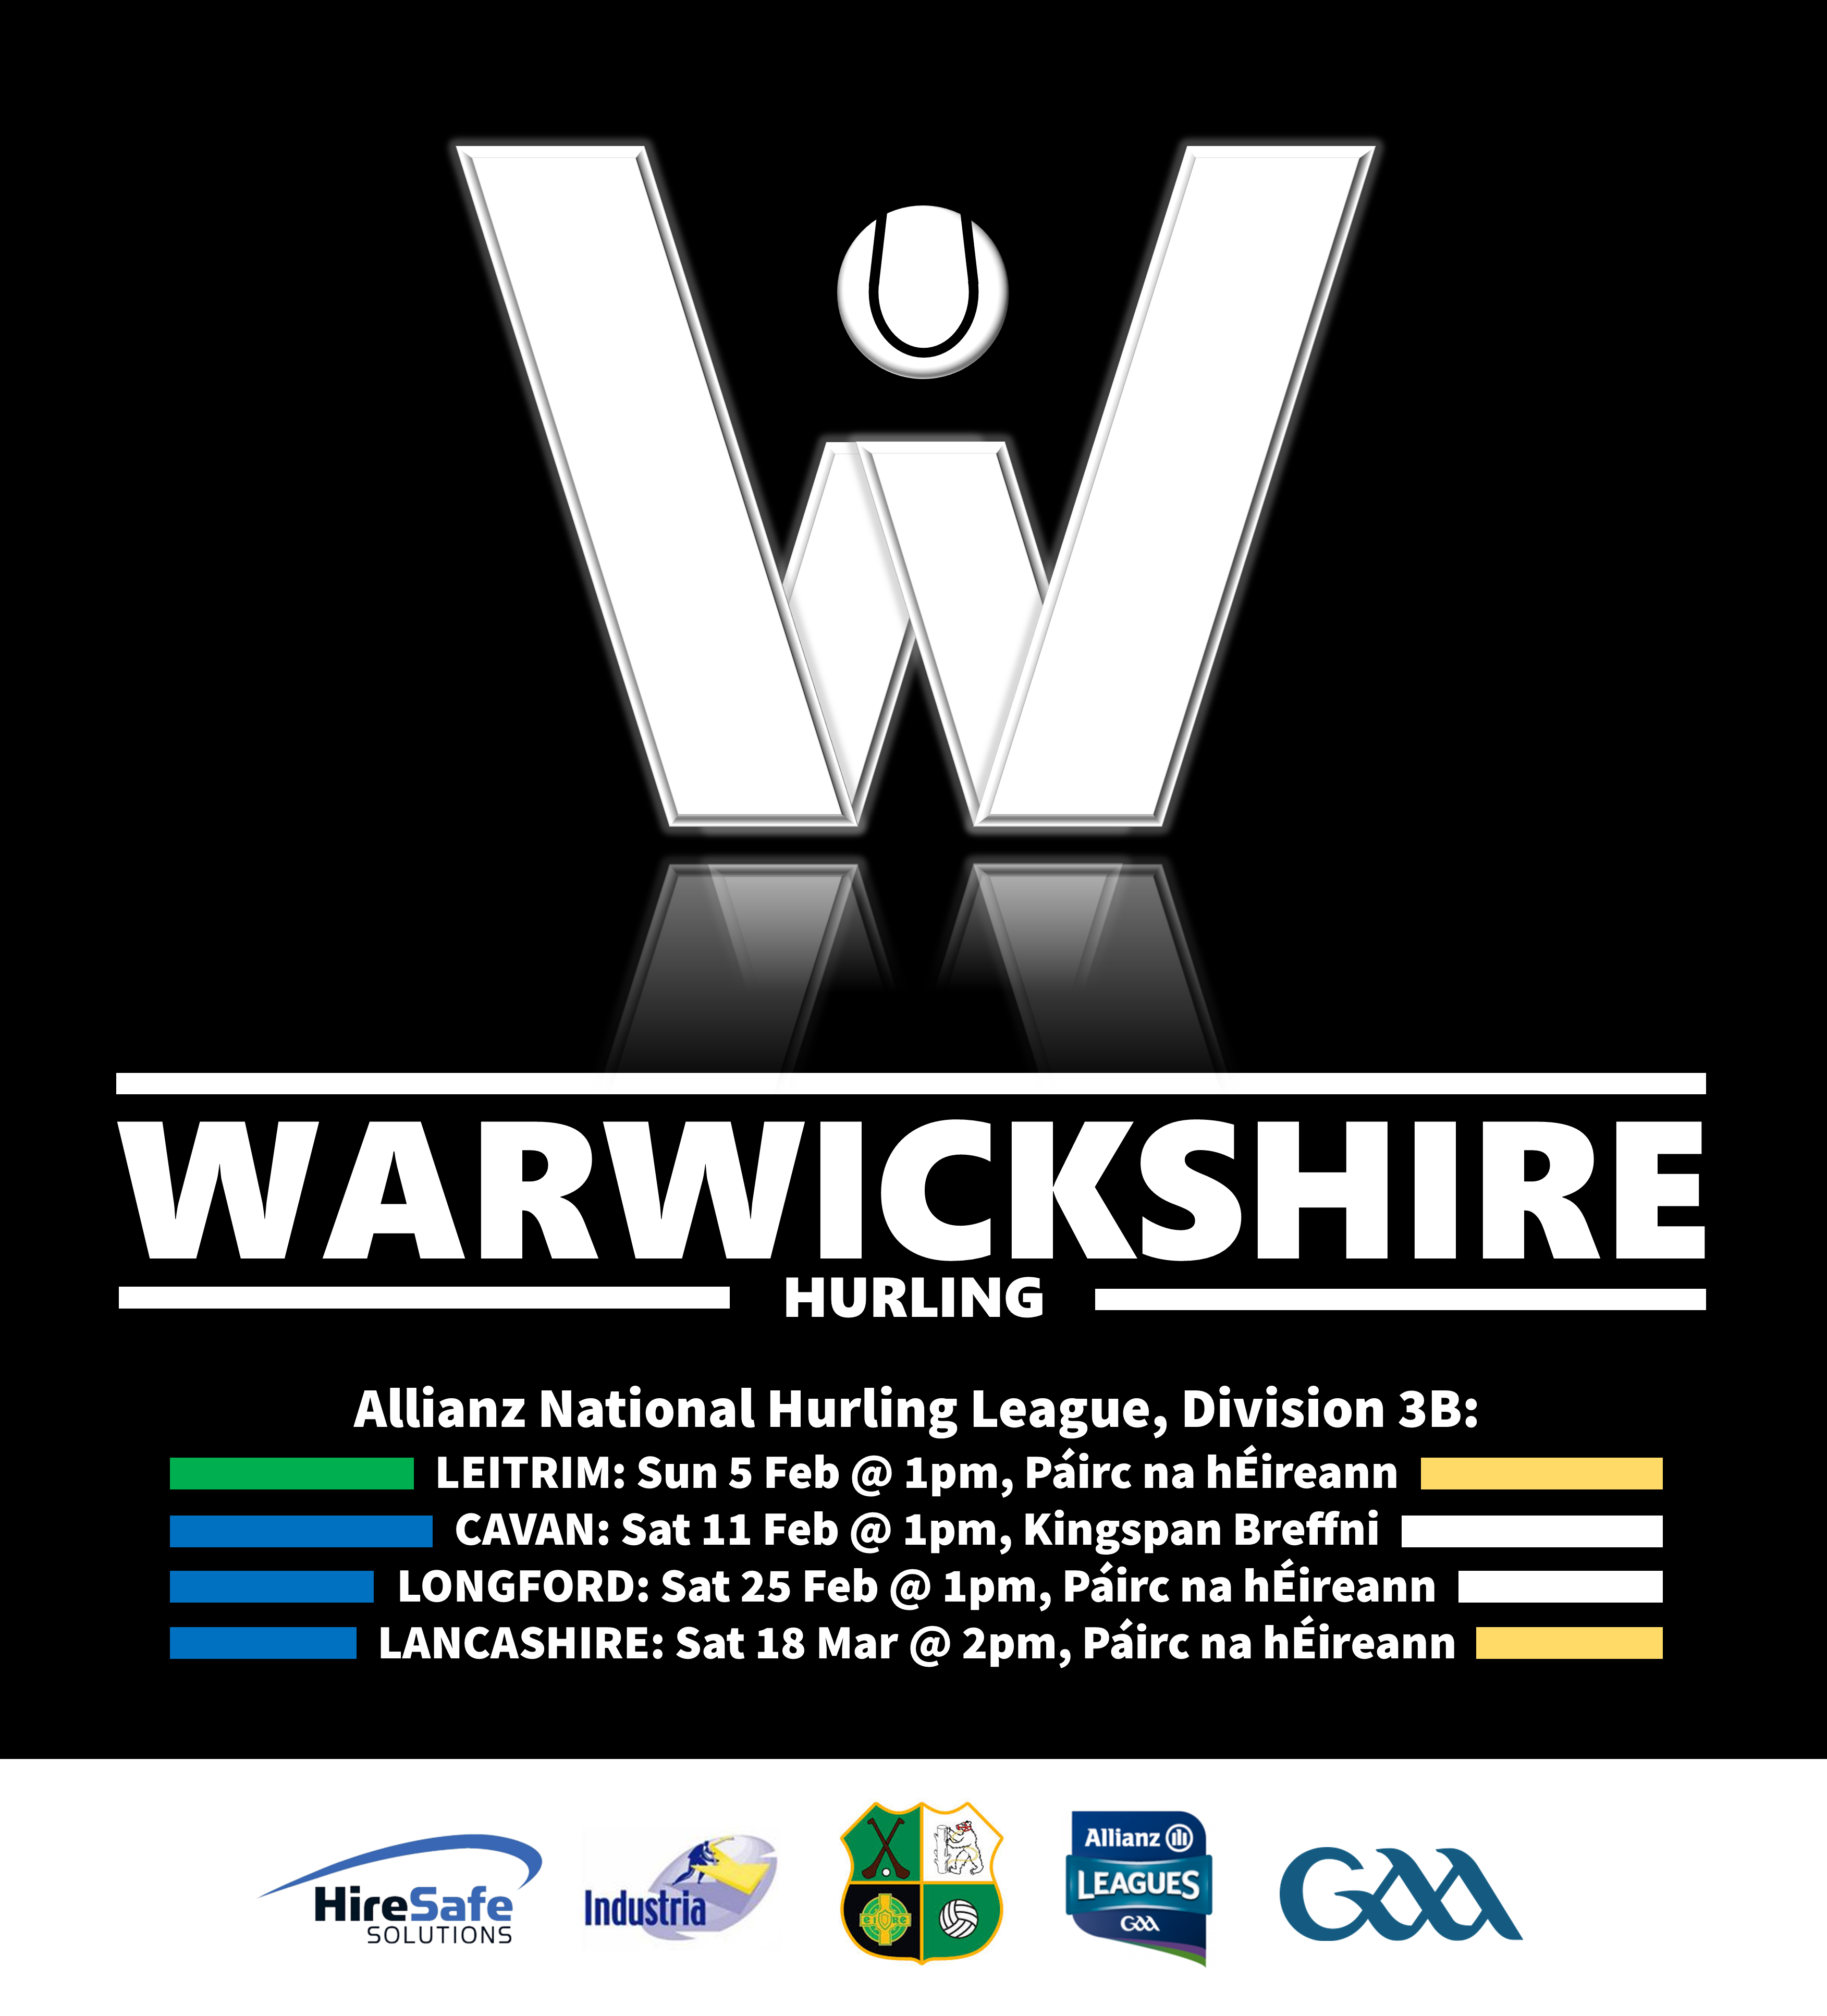 The National Hurling League returns to Warwickshire